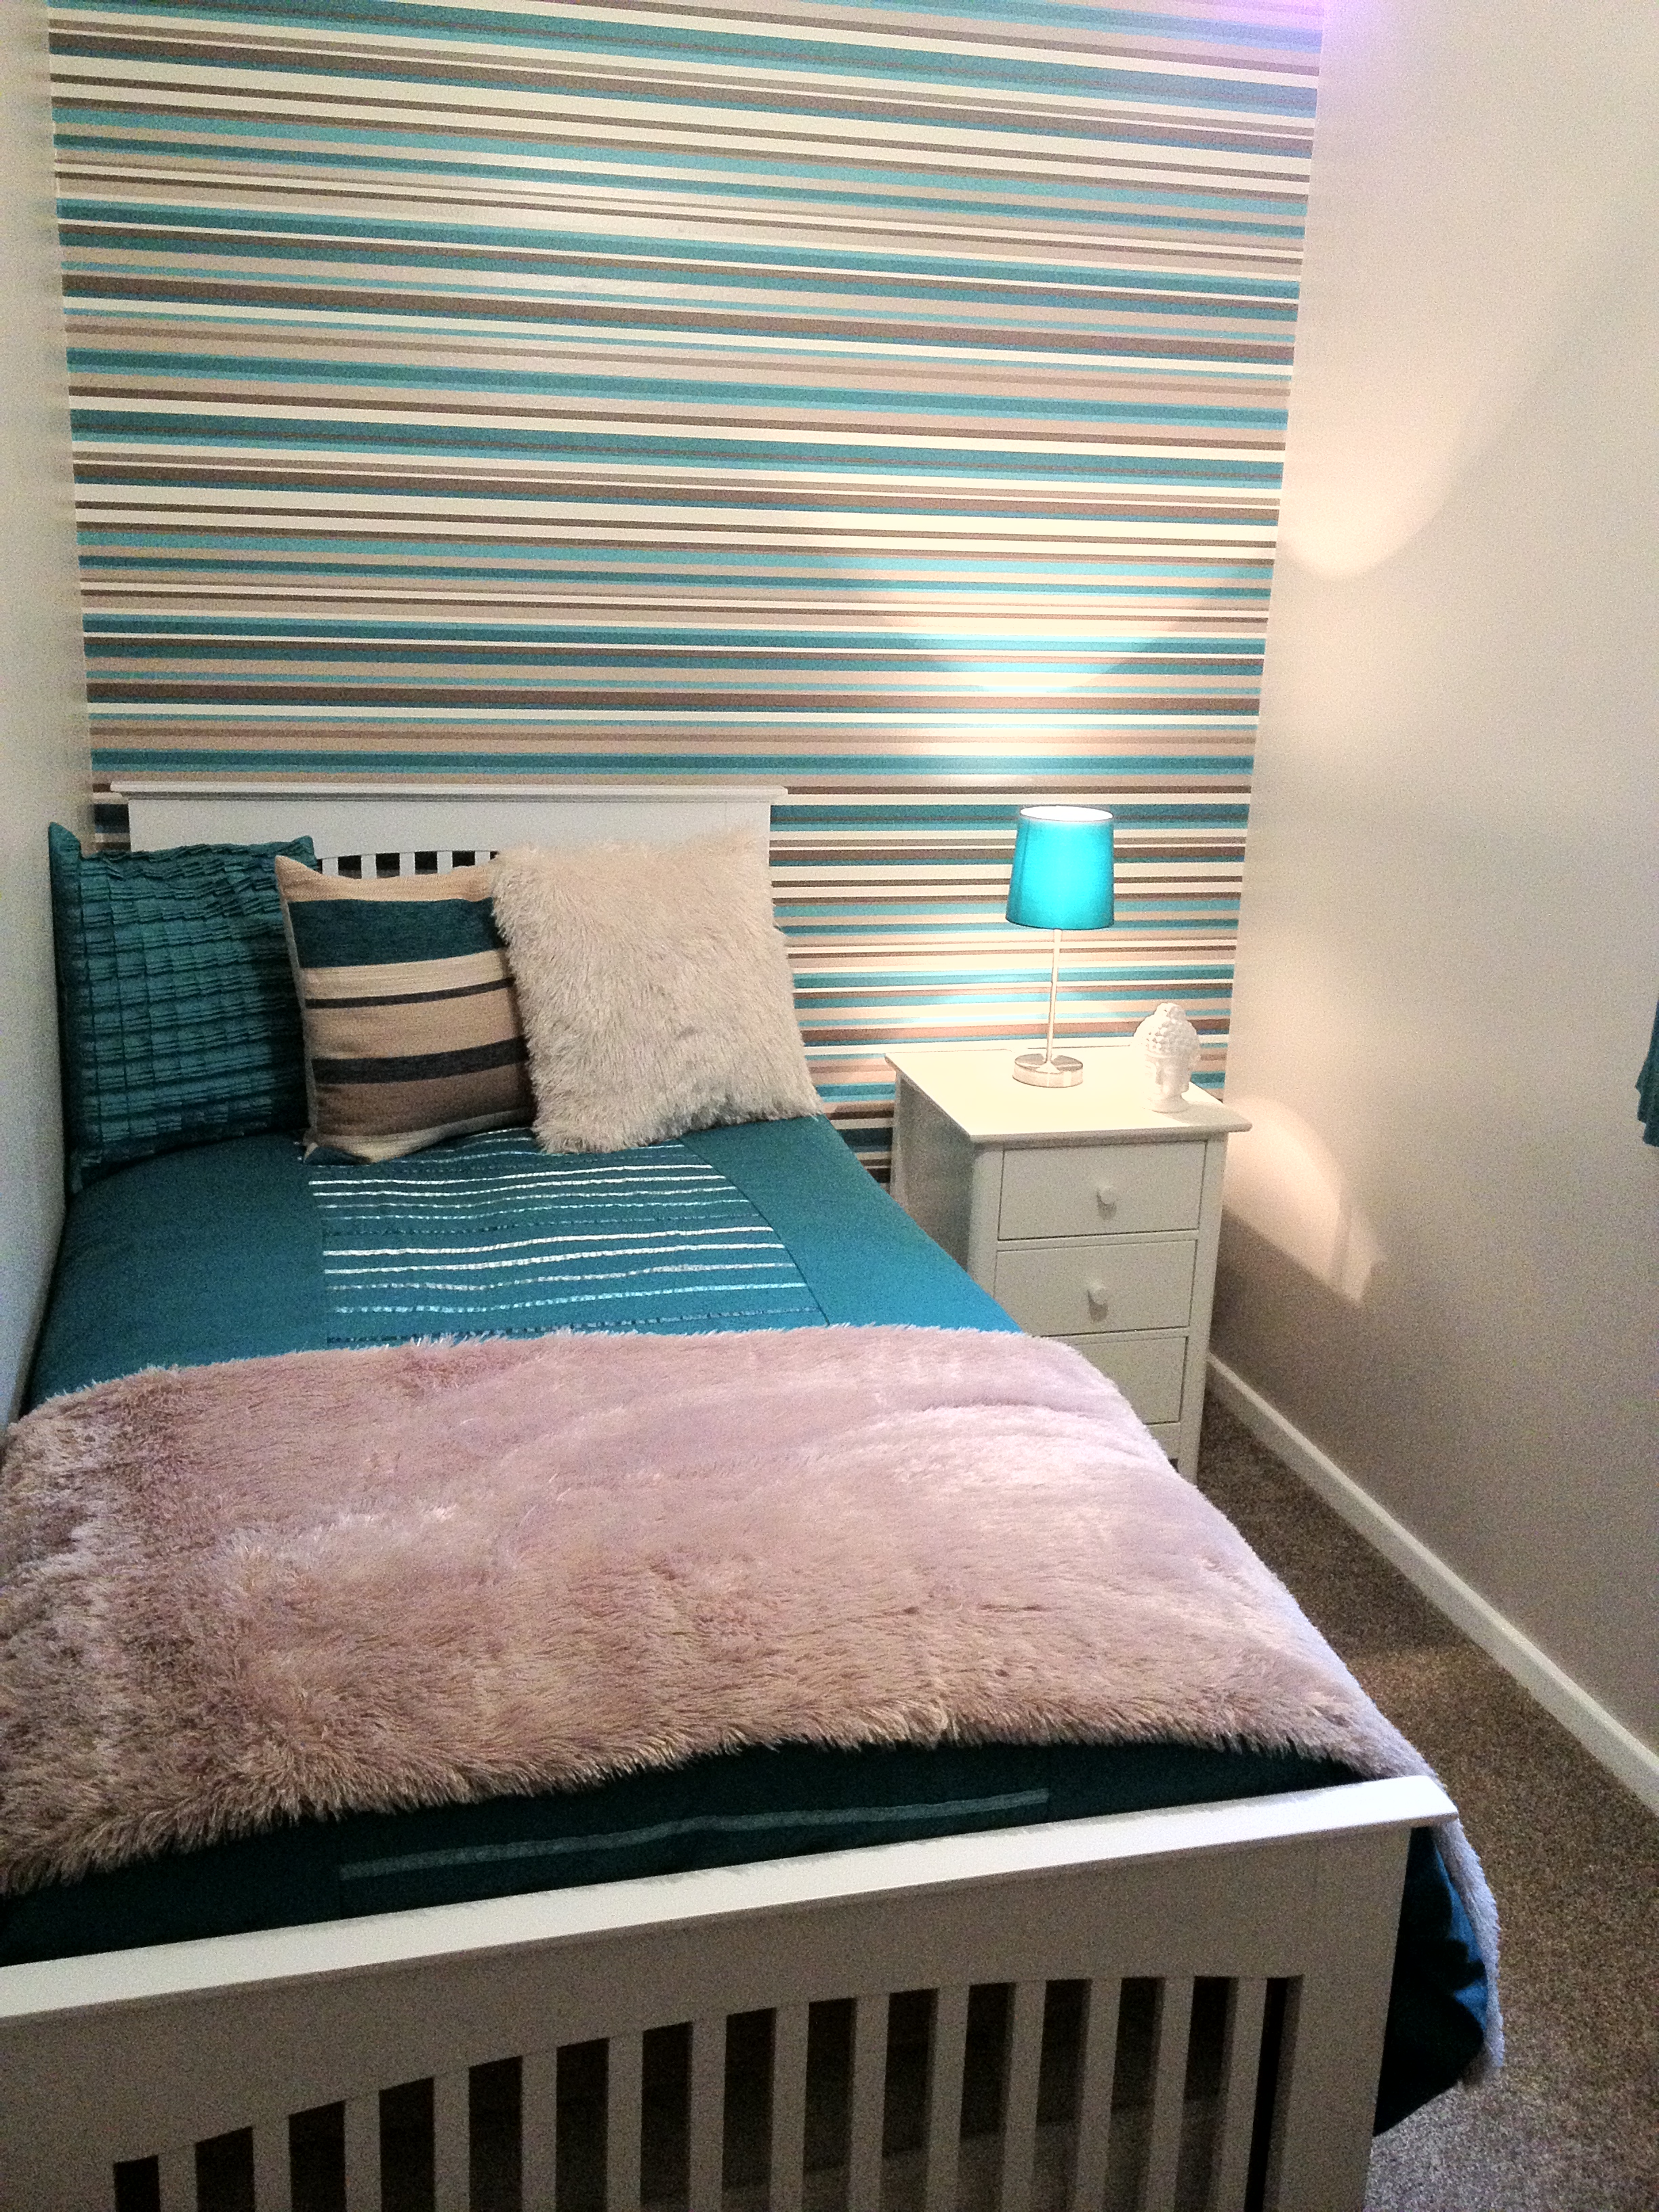 White and Teal Bedroom Ideas